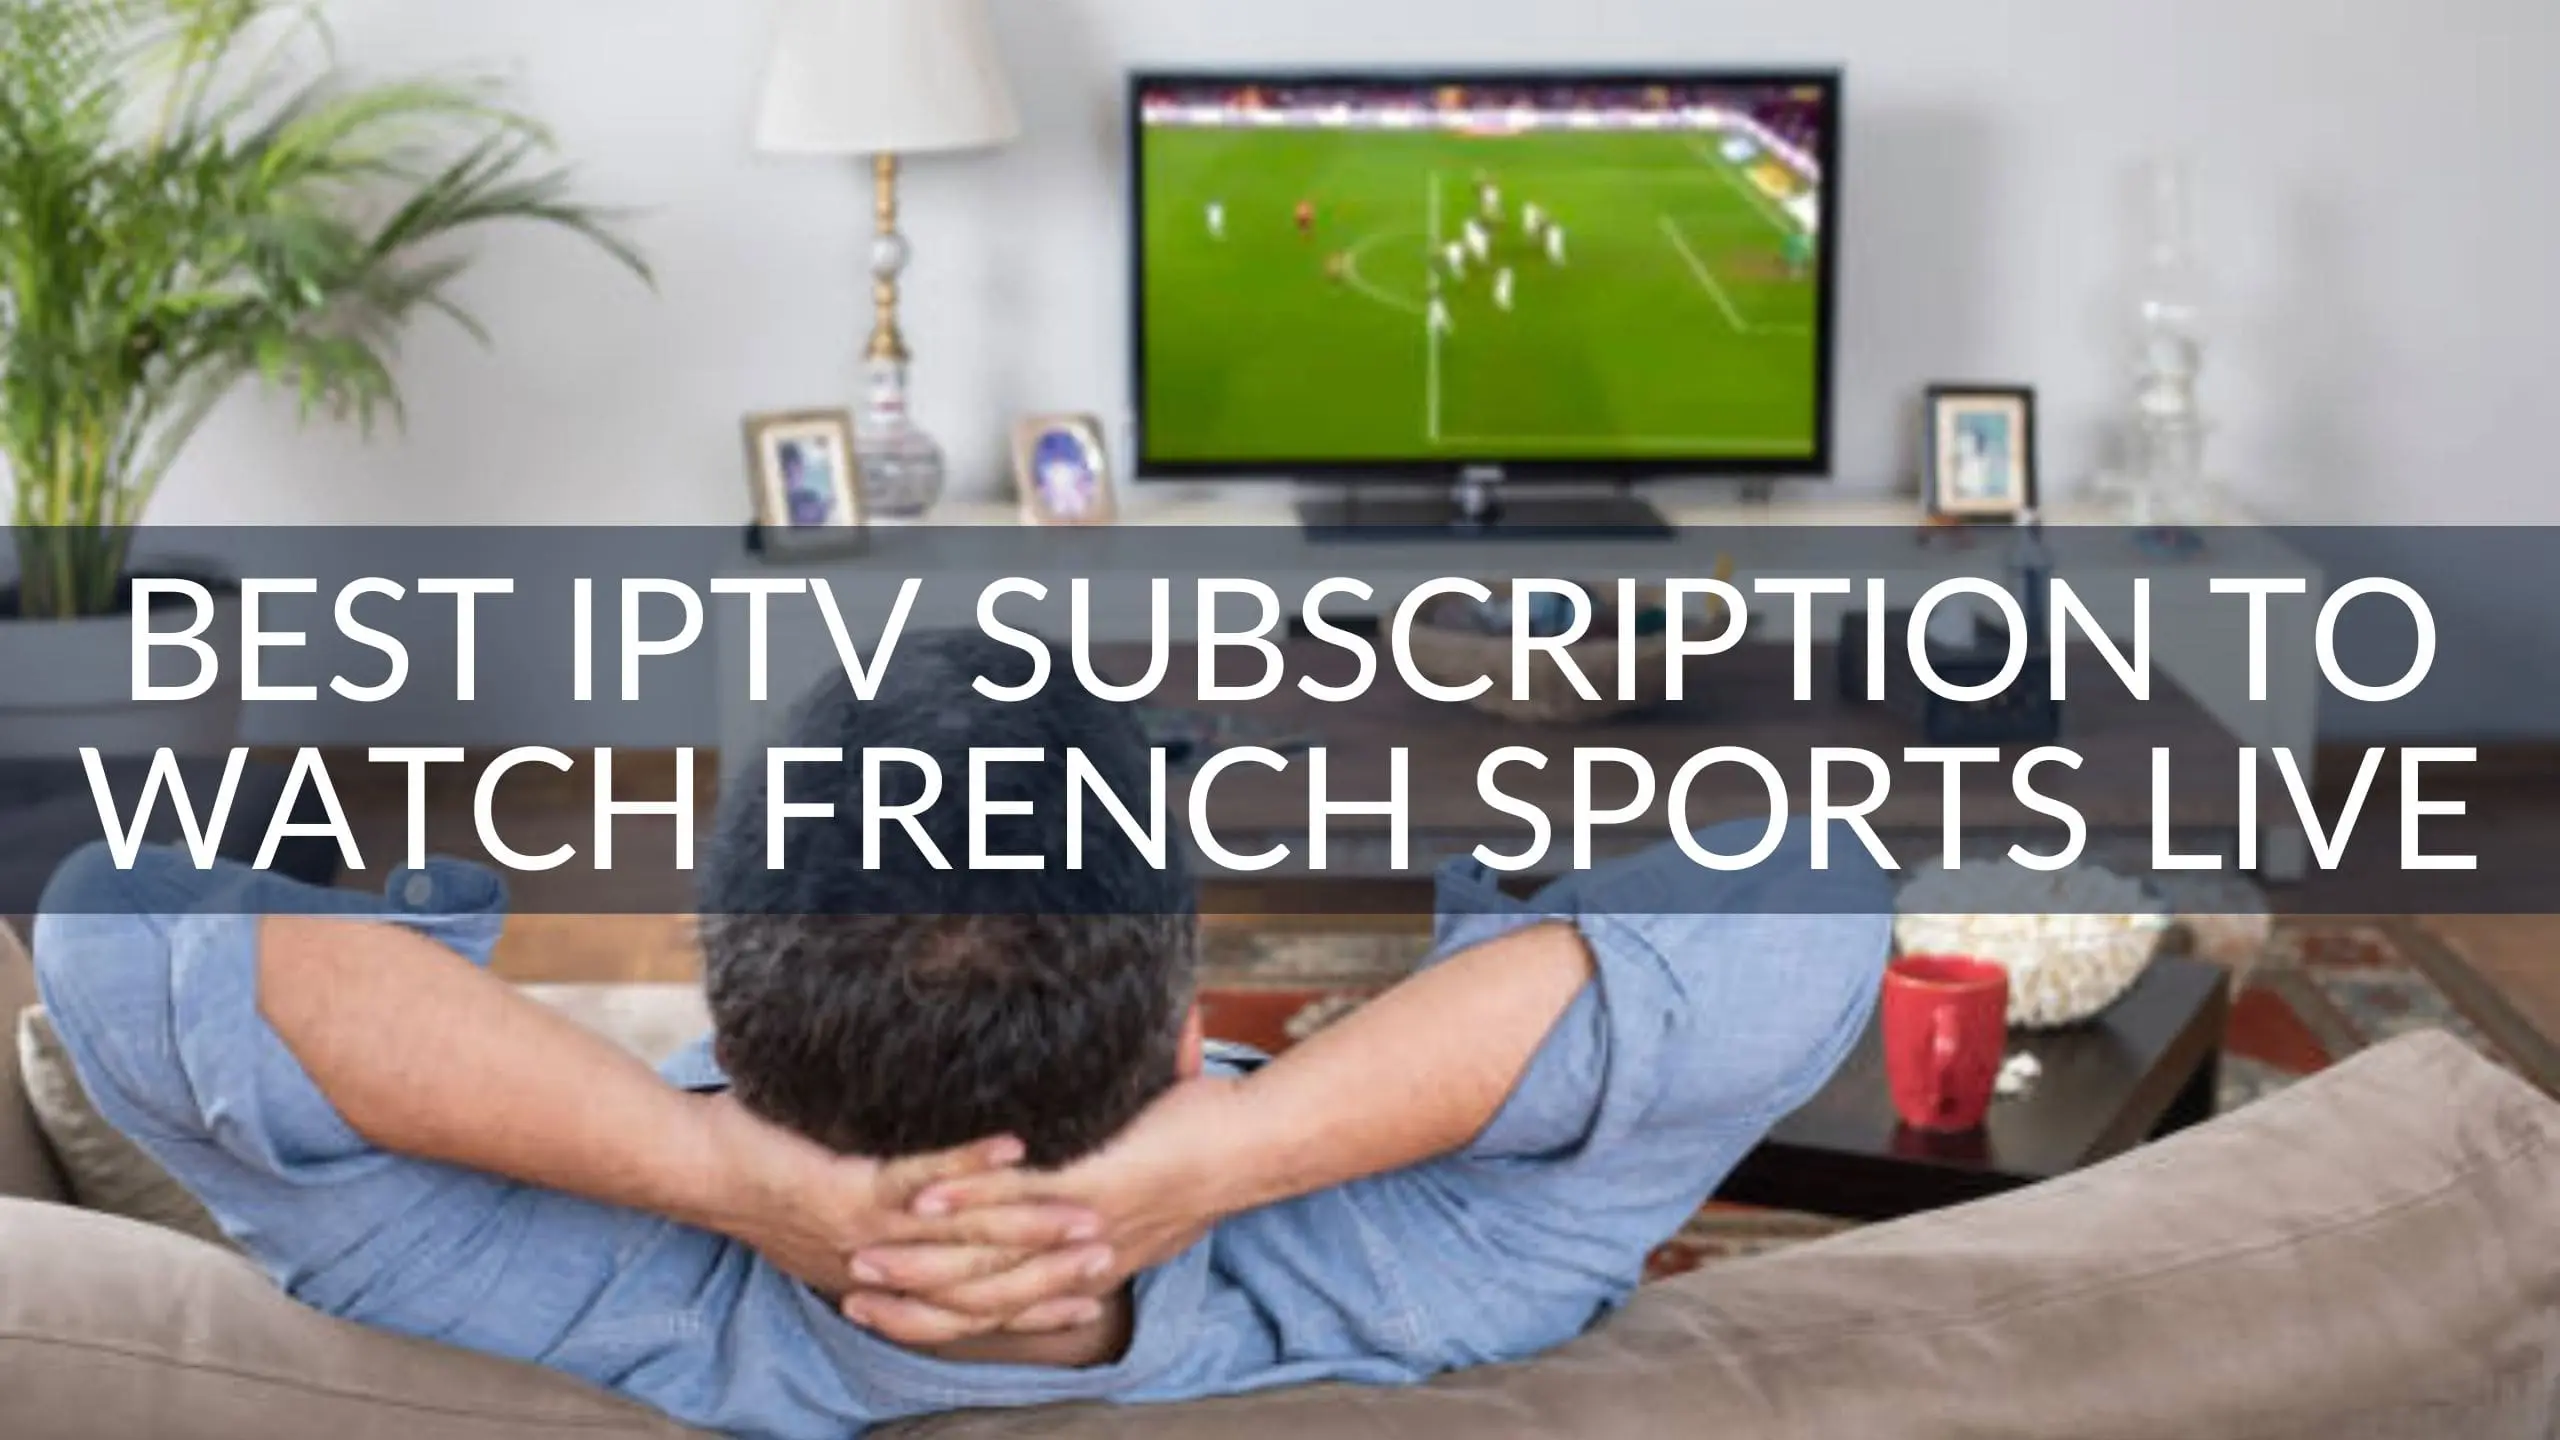 Best IPTV Subscription to Watch French Sports Live